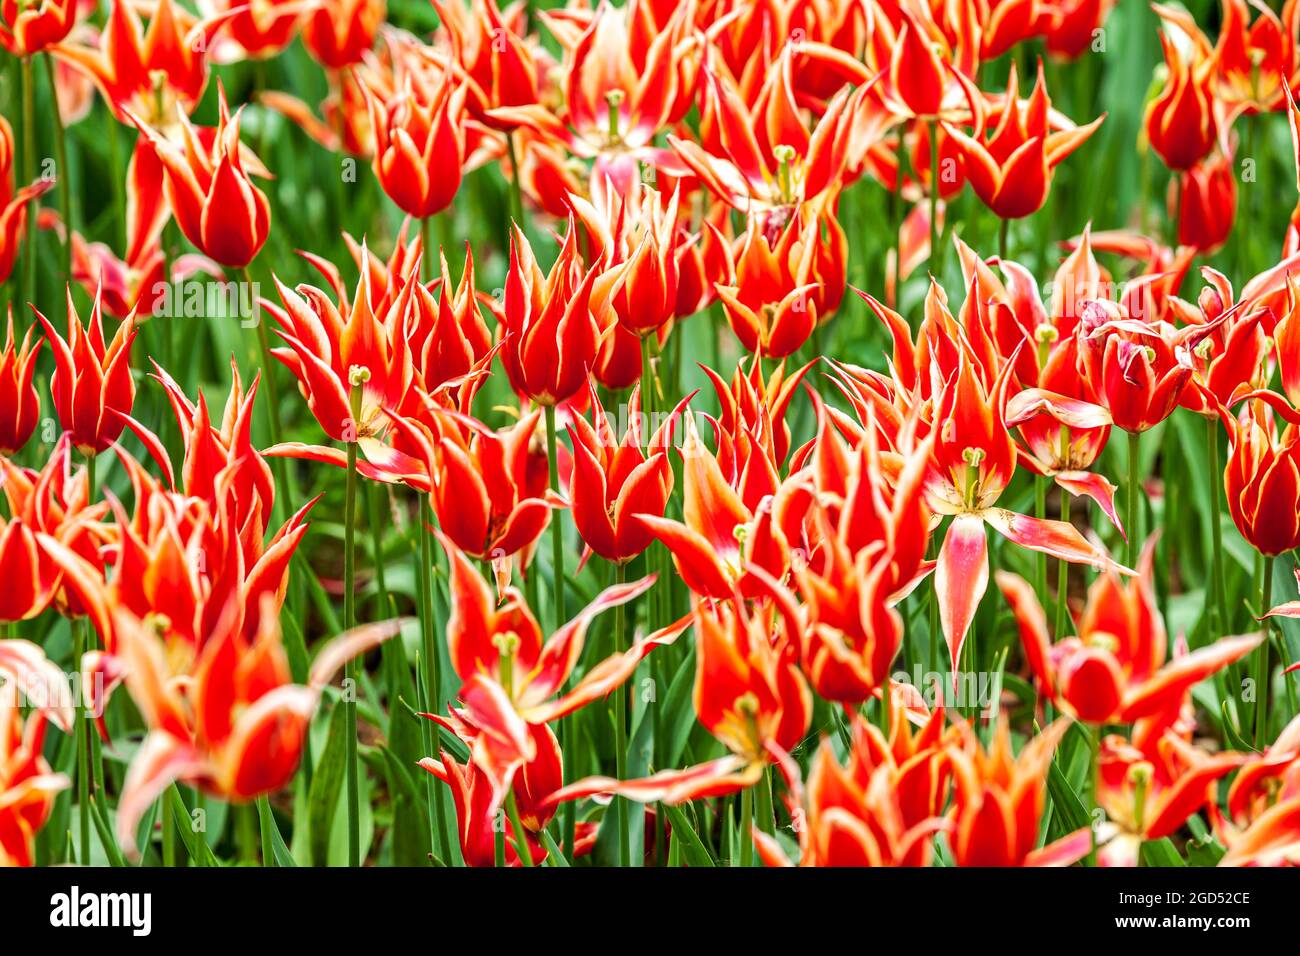 Ottoman Tulips. Beautiful colorful red flowers, vibrant floral background, flower fields in Istanbul - Gulhane Park Stock Photo